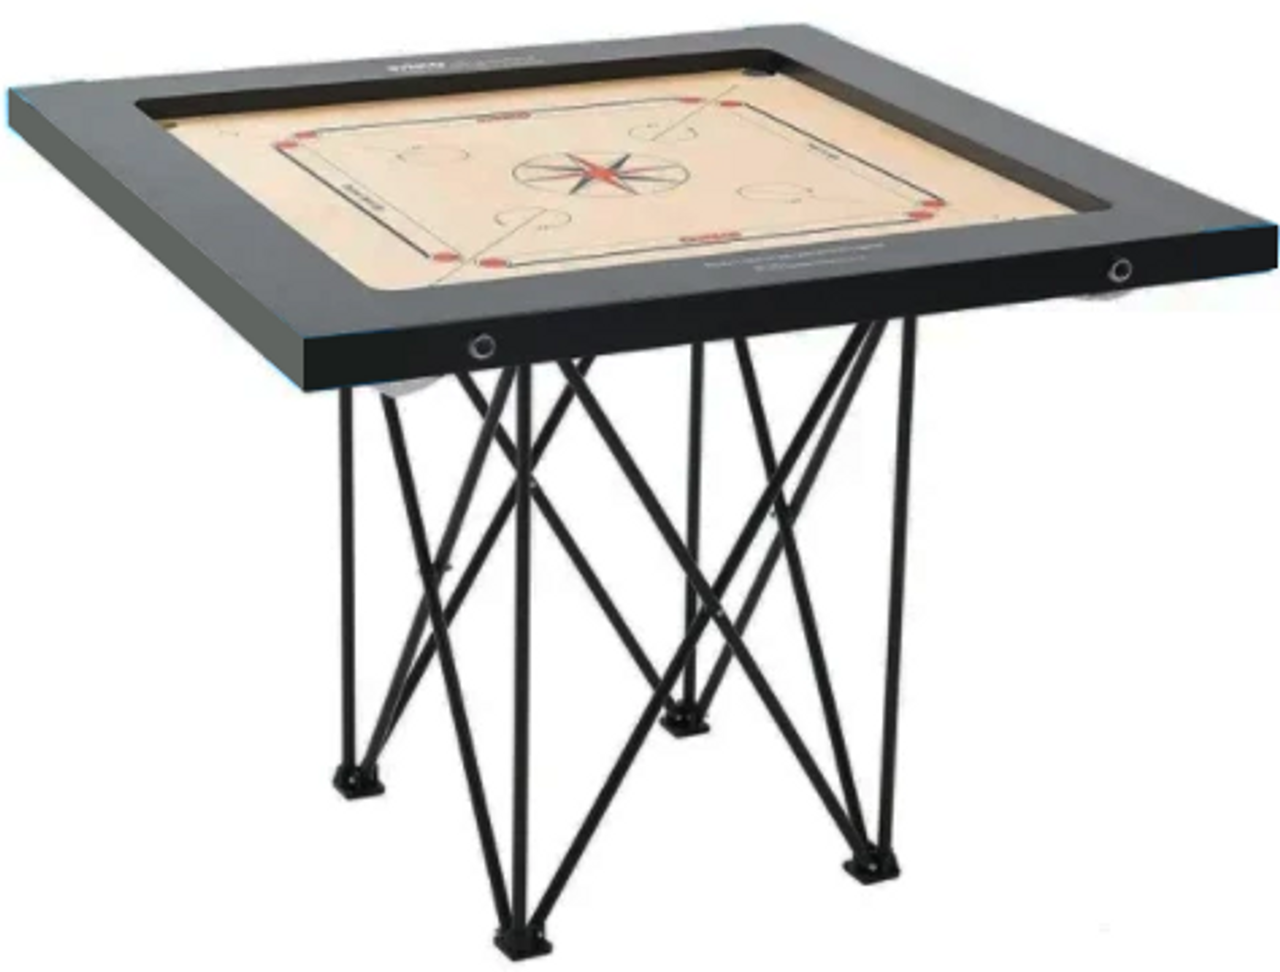 Carrom Board CHAMPIONSHIP 89cm x 89cm & STAND PLUS FREE PACKAGE OFFERS